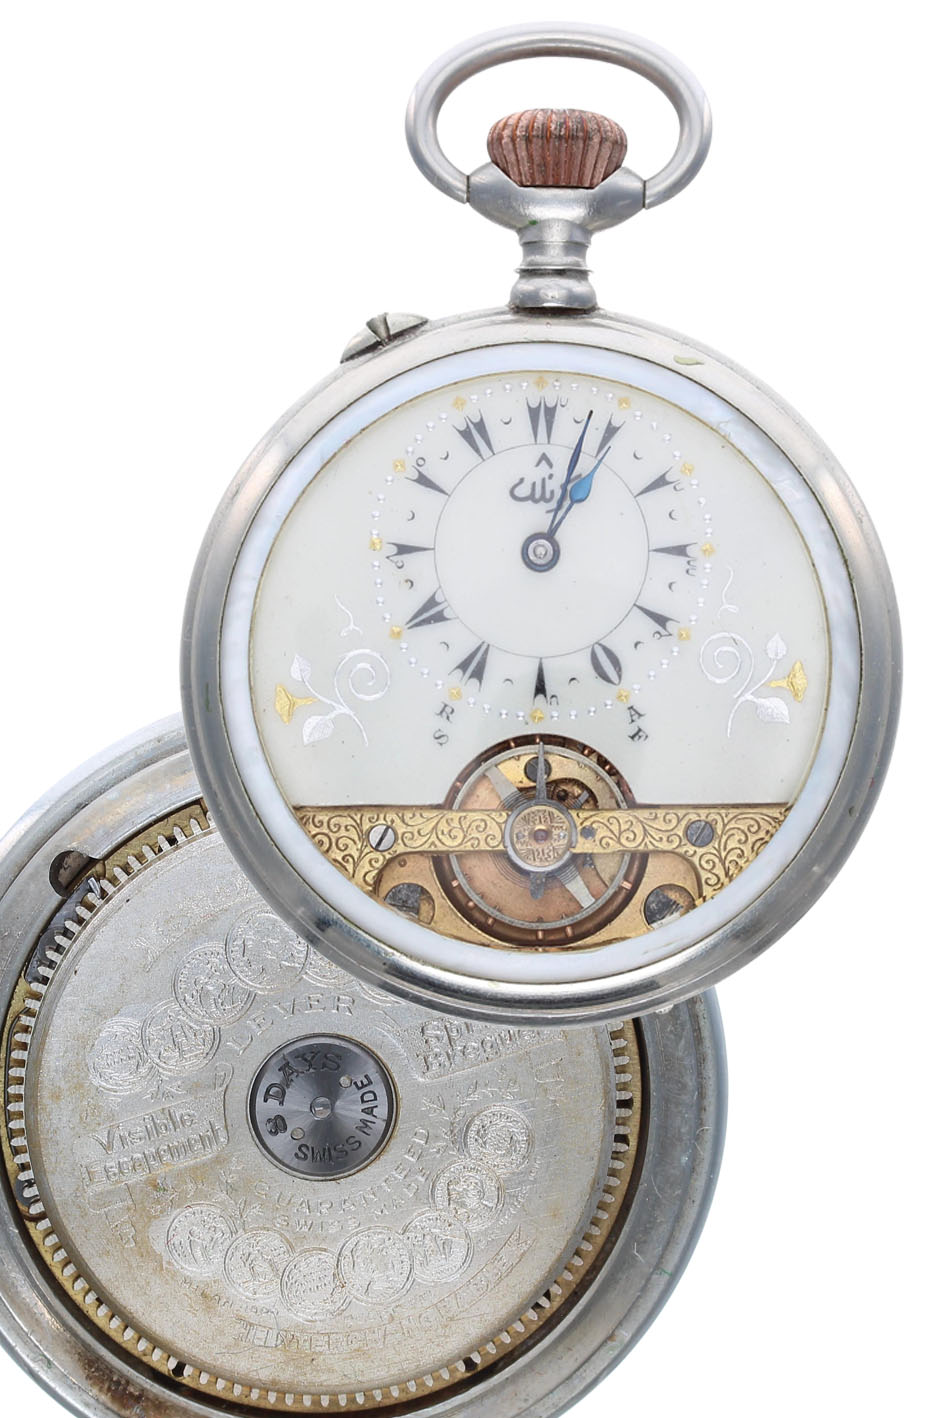 Turkish Market - Swiss Hebdomas type 8 days nickel and mother of pearl cased pocket watch, decorated